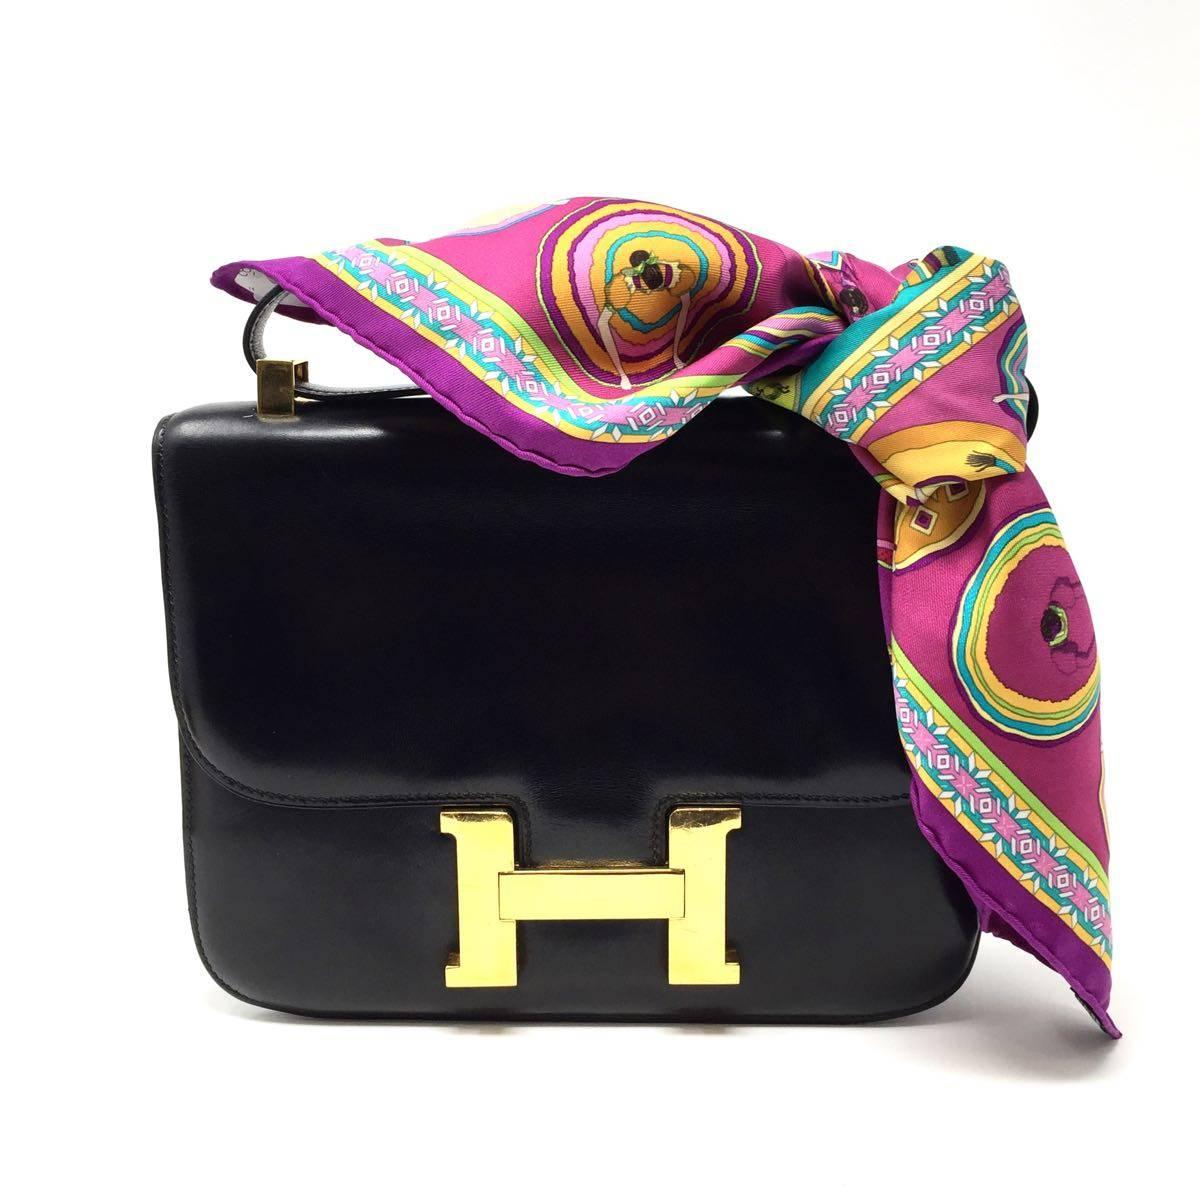 Hermes Vintage Constance 22 cm in black box leather and gold tone hardware. Year 1976, The interior features two pockets, one zipped. Combined with the gold-tone large H hardware, this bag is a must have for any Hermès collector. The adjustable